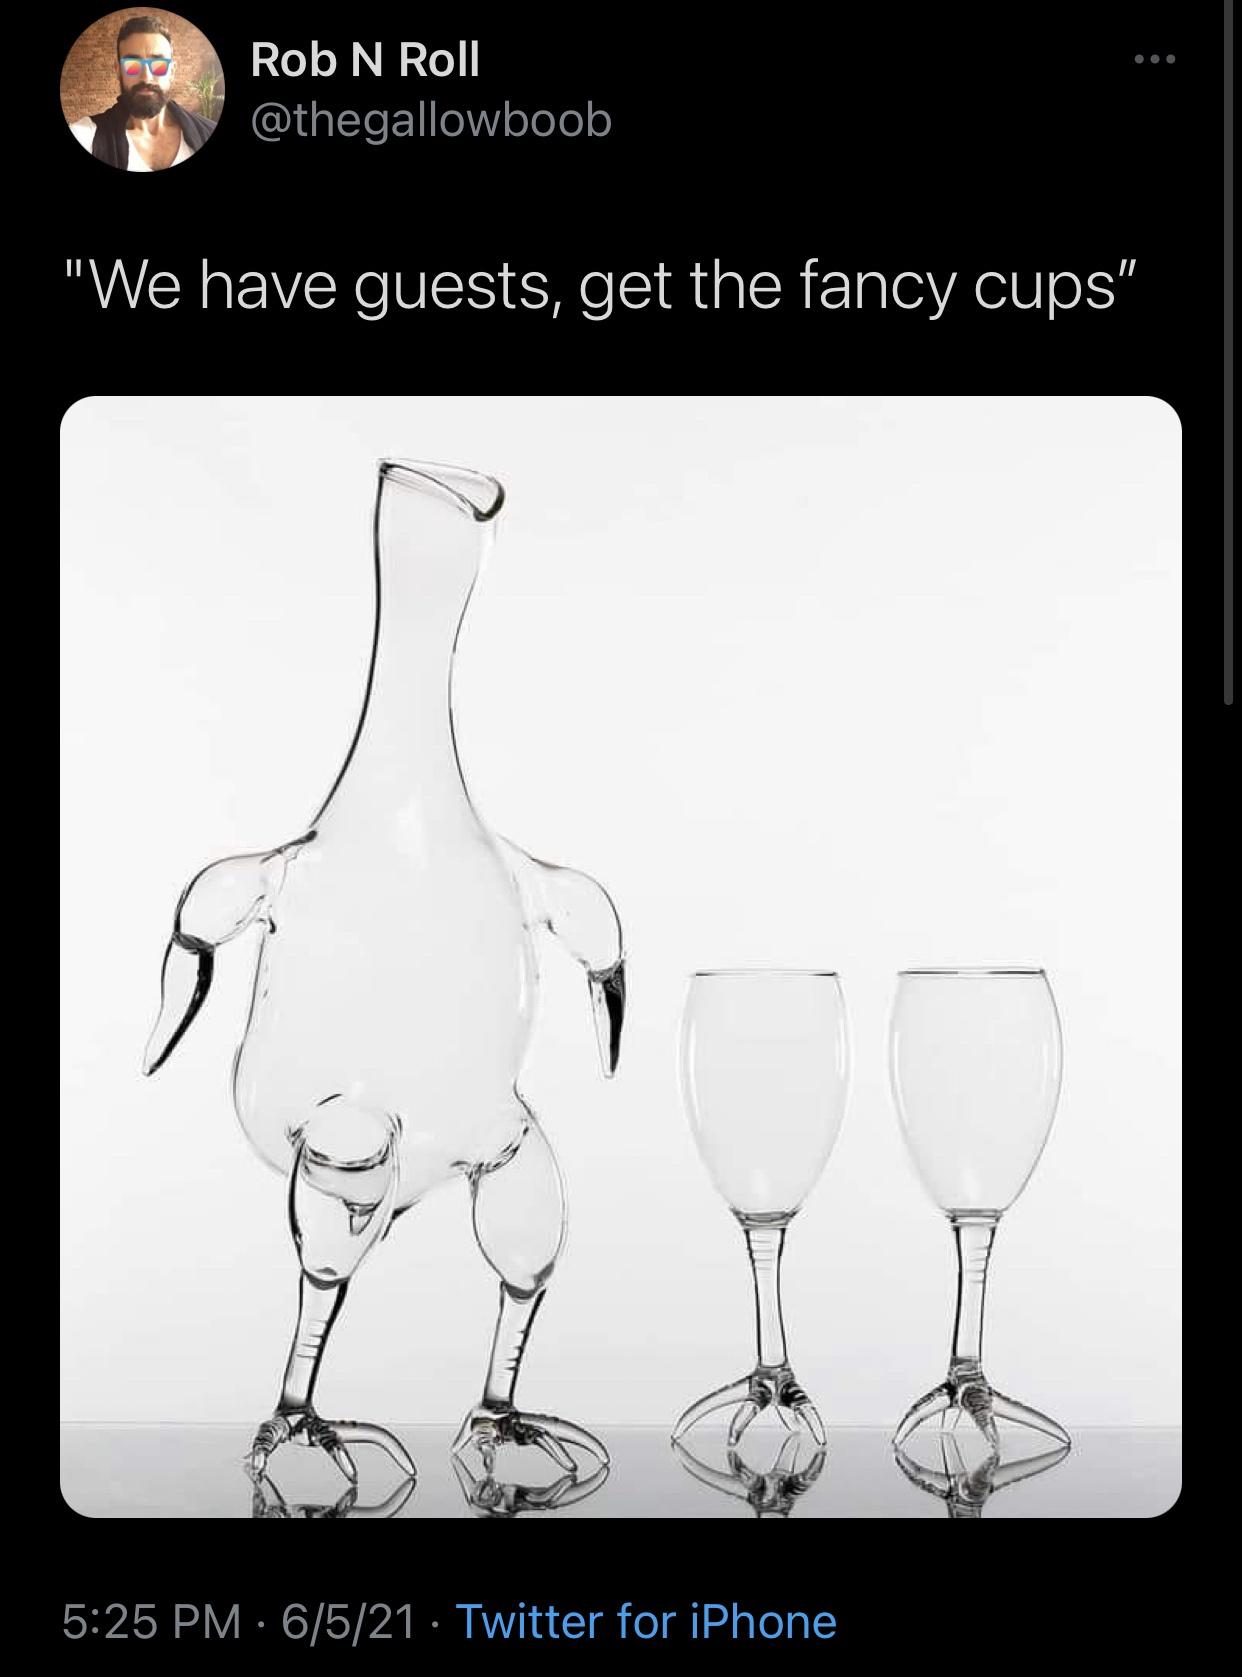 most random meme - Rob N Roll "We have guests, get the fancy cups" 6521 Twitter for iPhone